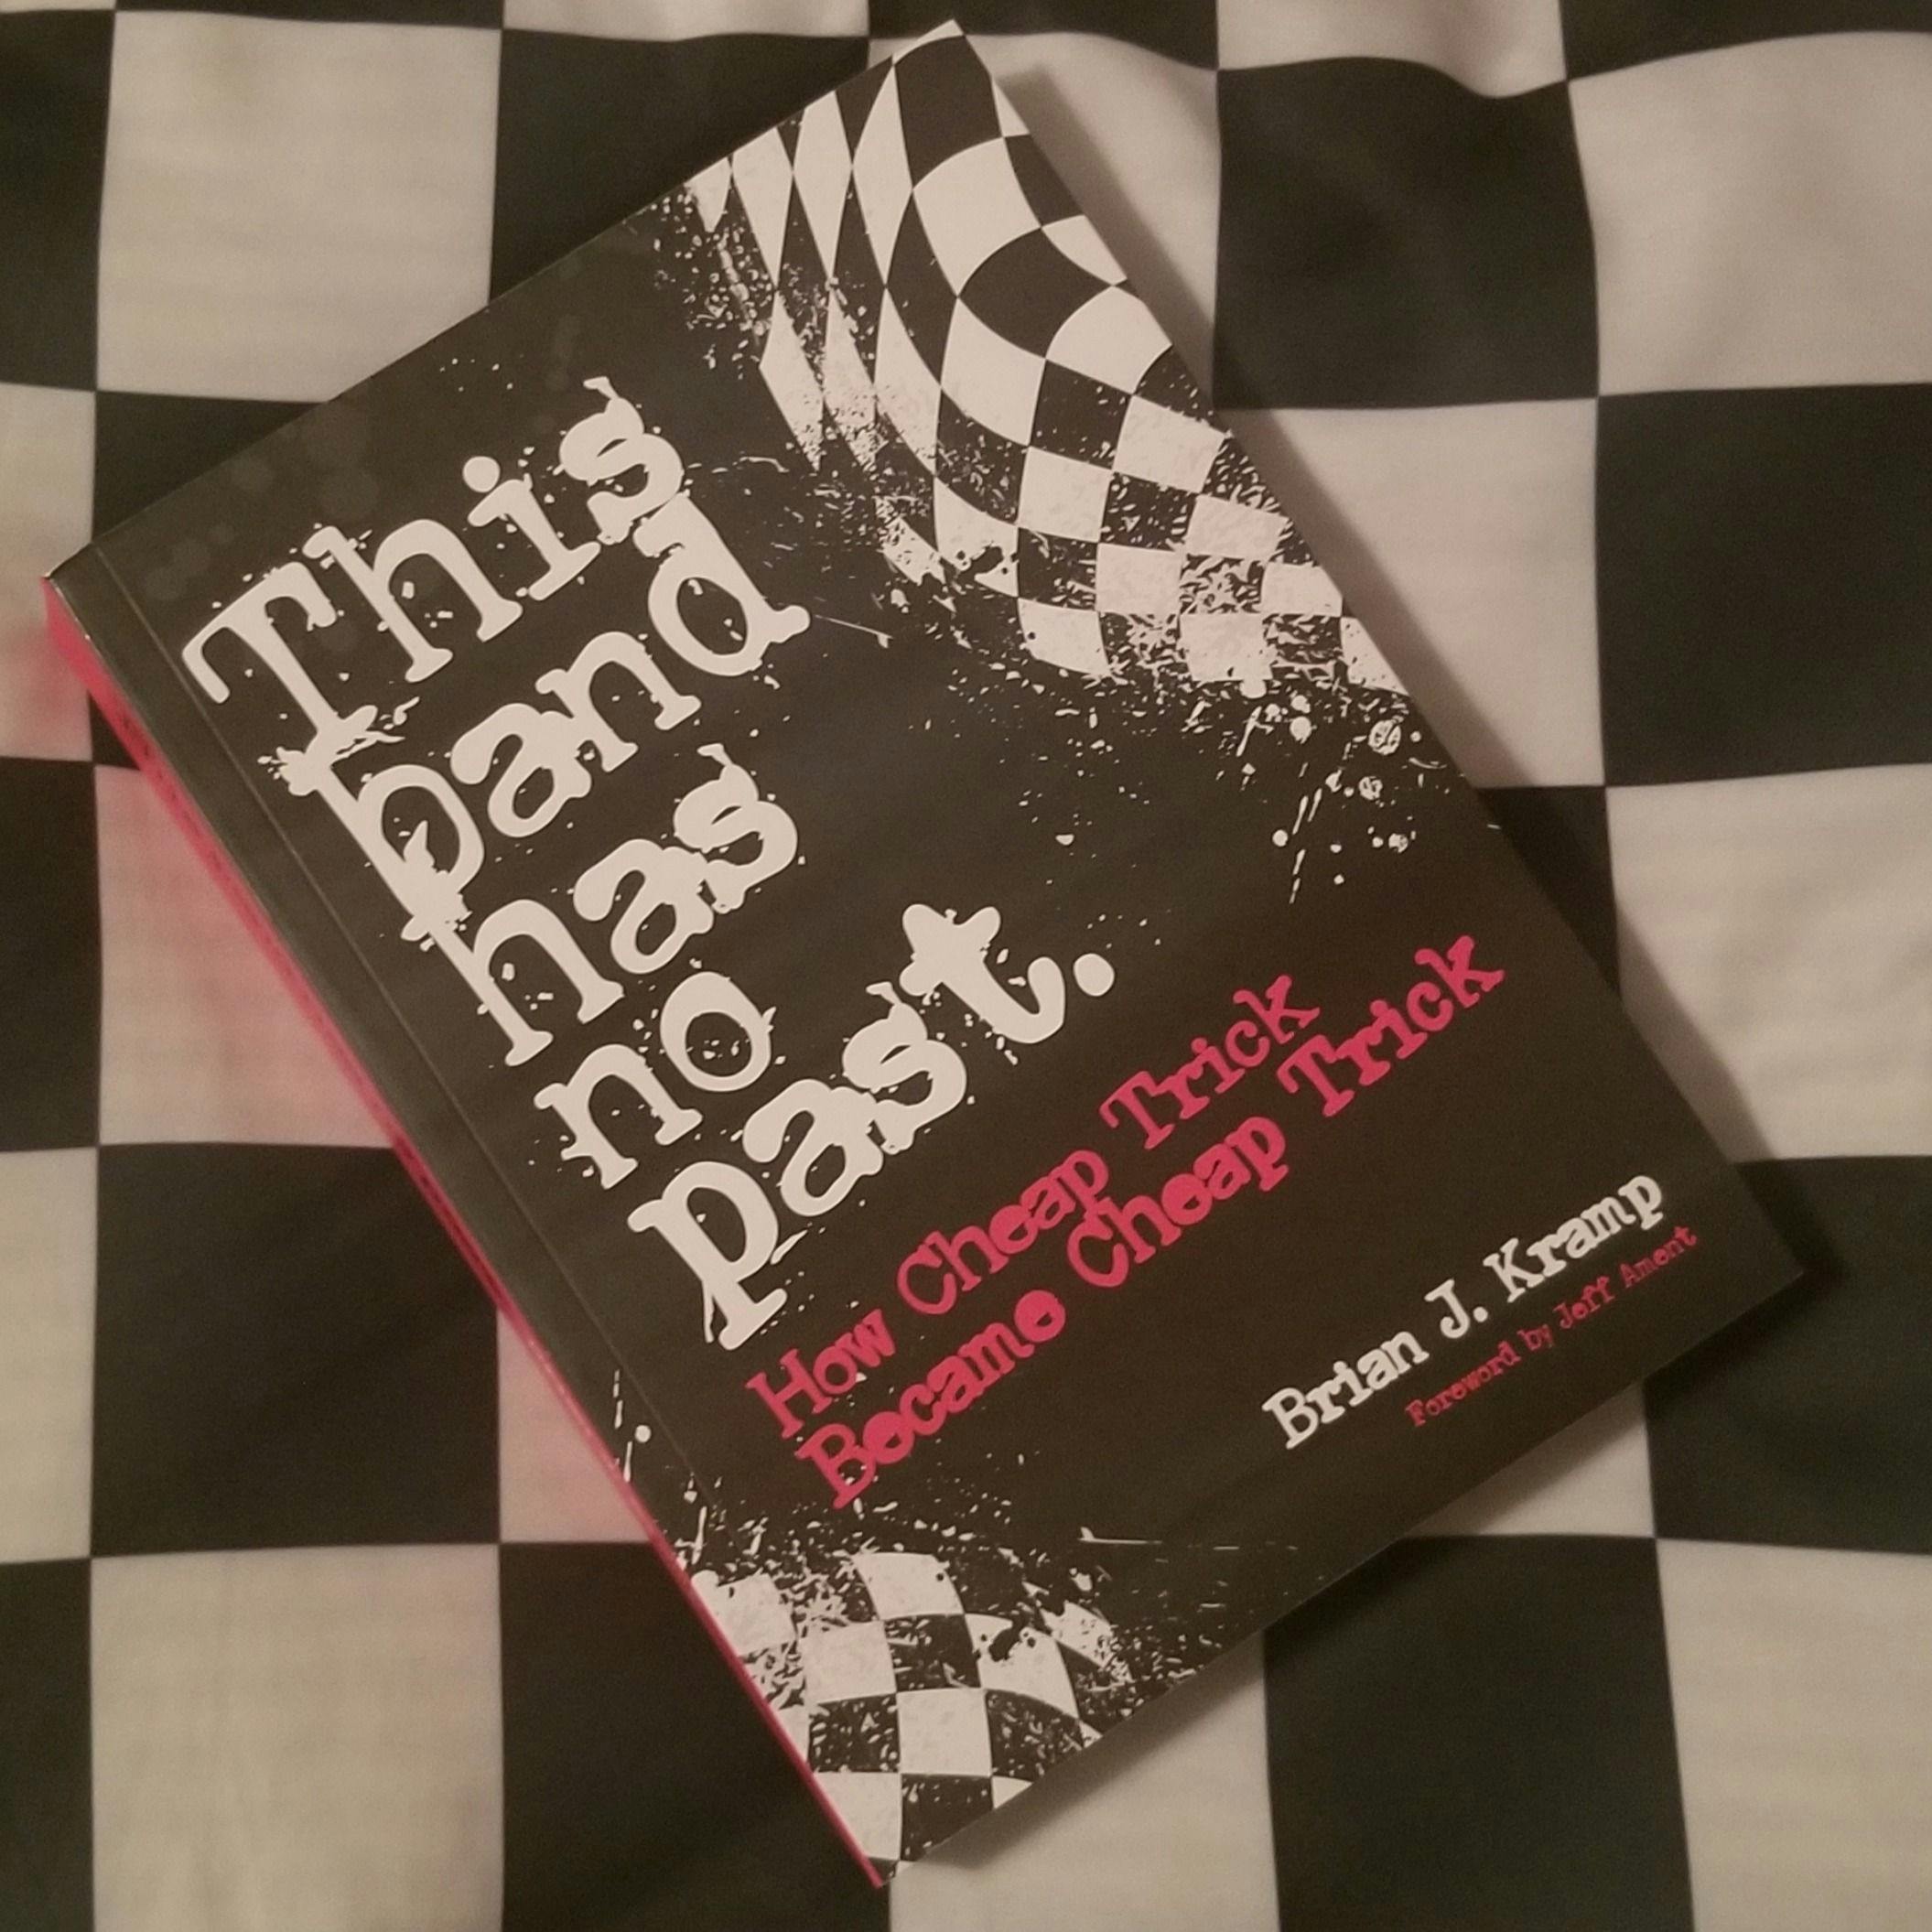 I WROTE A BOOK! THIS BAND HAS NO PAST: HOW CHEAP TRICK BECAME CHEAP TRICK